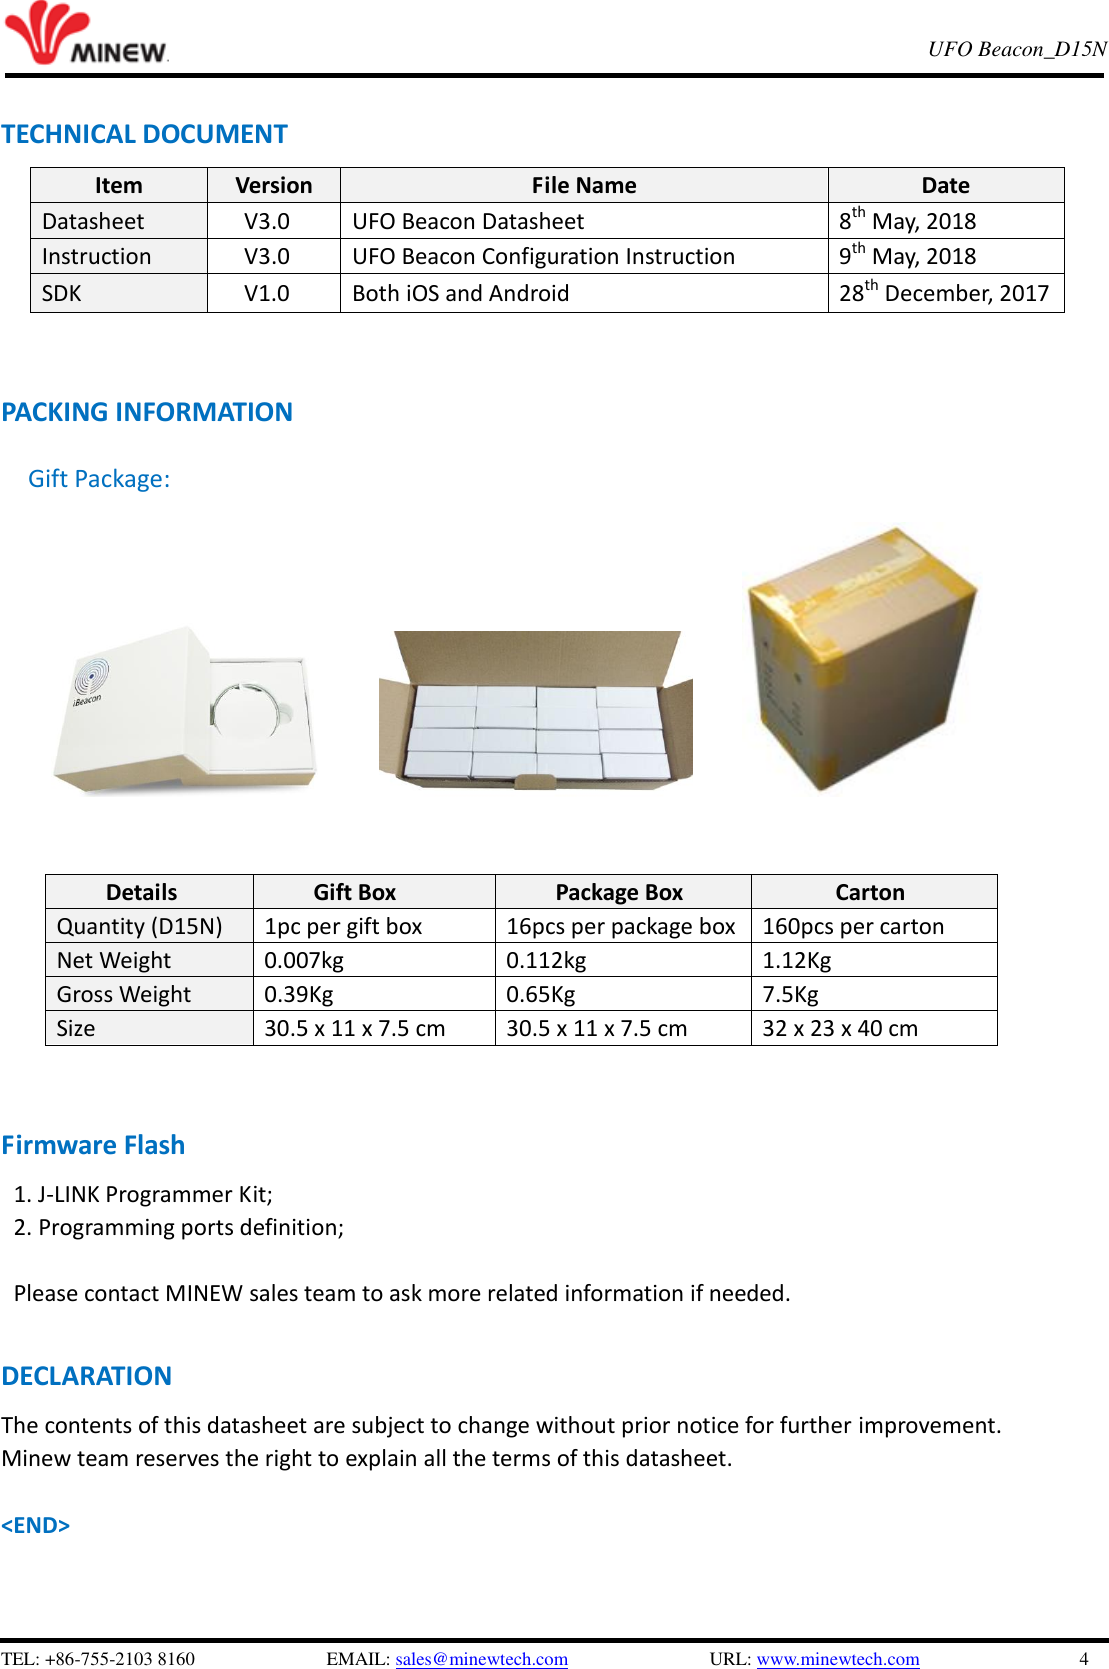   TEL: +86-755-2103 8160                          EMAIL: sales@minewtech.com               URL: www.minewtech.com                 4 E8 TagBeacon   UFO Beacon_D15N    TECHNICAL DOCUMENT Item Version File Name Date Datasheet V3.0 UFO Beacon Datasheet 8th May, 2018 Instruction V3.0 UFO Beacon Configuration Instruction 9th May, 2018 SDK     V1.0 Both iOS and Android 28th December, 2017      PACKING INFORMATION Gift Package:                                                                      Details Gift Box Package Box Carton Quantity (D15N) 1pc per gift box 16pcs per package box 160pcs per carton Net Weight 0.007kg 0.112kg 1.12Kg Gross Weight 0.39Kg 0.65Kg 7.5Kg Size 30.5 x 11 x 7.5 cm 30.5 x 11 x 7.5 cm 32 x 23 x 40 cm     Firmware Flash 1. J-LINK Programmer Kit;   2. Programming ports definition;  Please contact MINEW sales team to ask more related information if needed.  DECLARATION The contents of this datasheet are subject to change without prior notice for further improvement.   Minew team reserves the right to explain all the terms of this datasheet.    &lt;END&gt; 